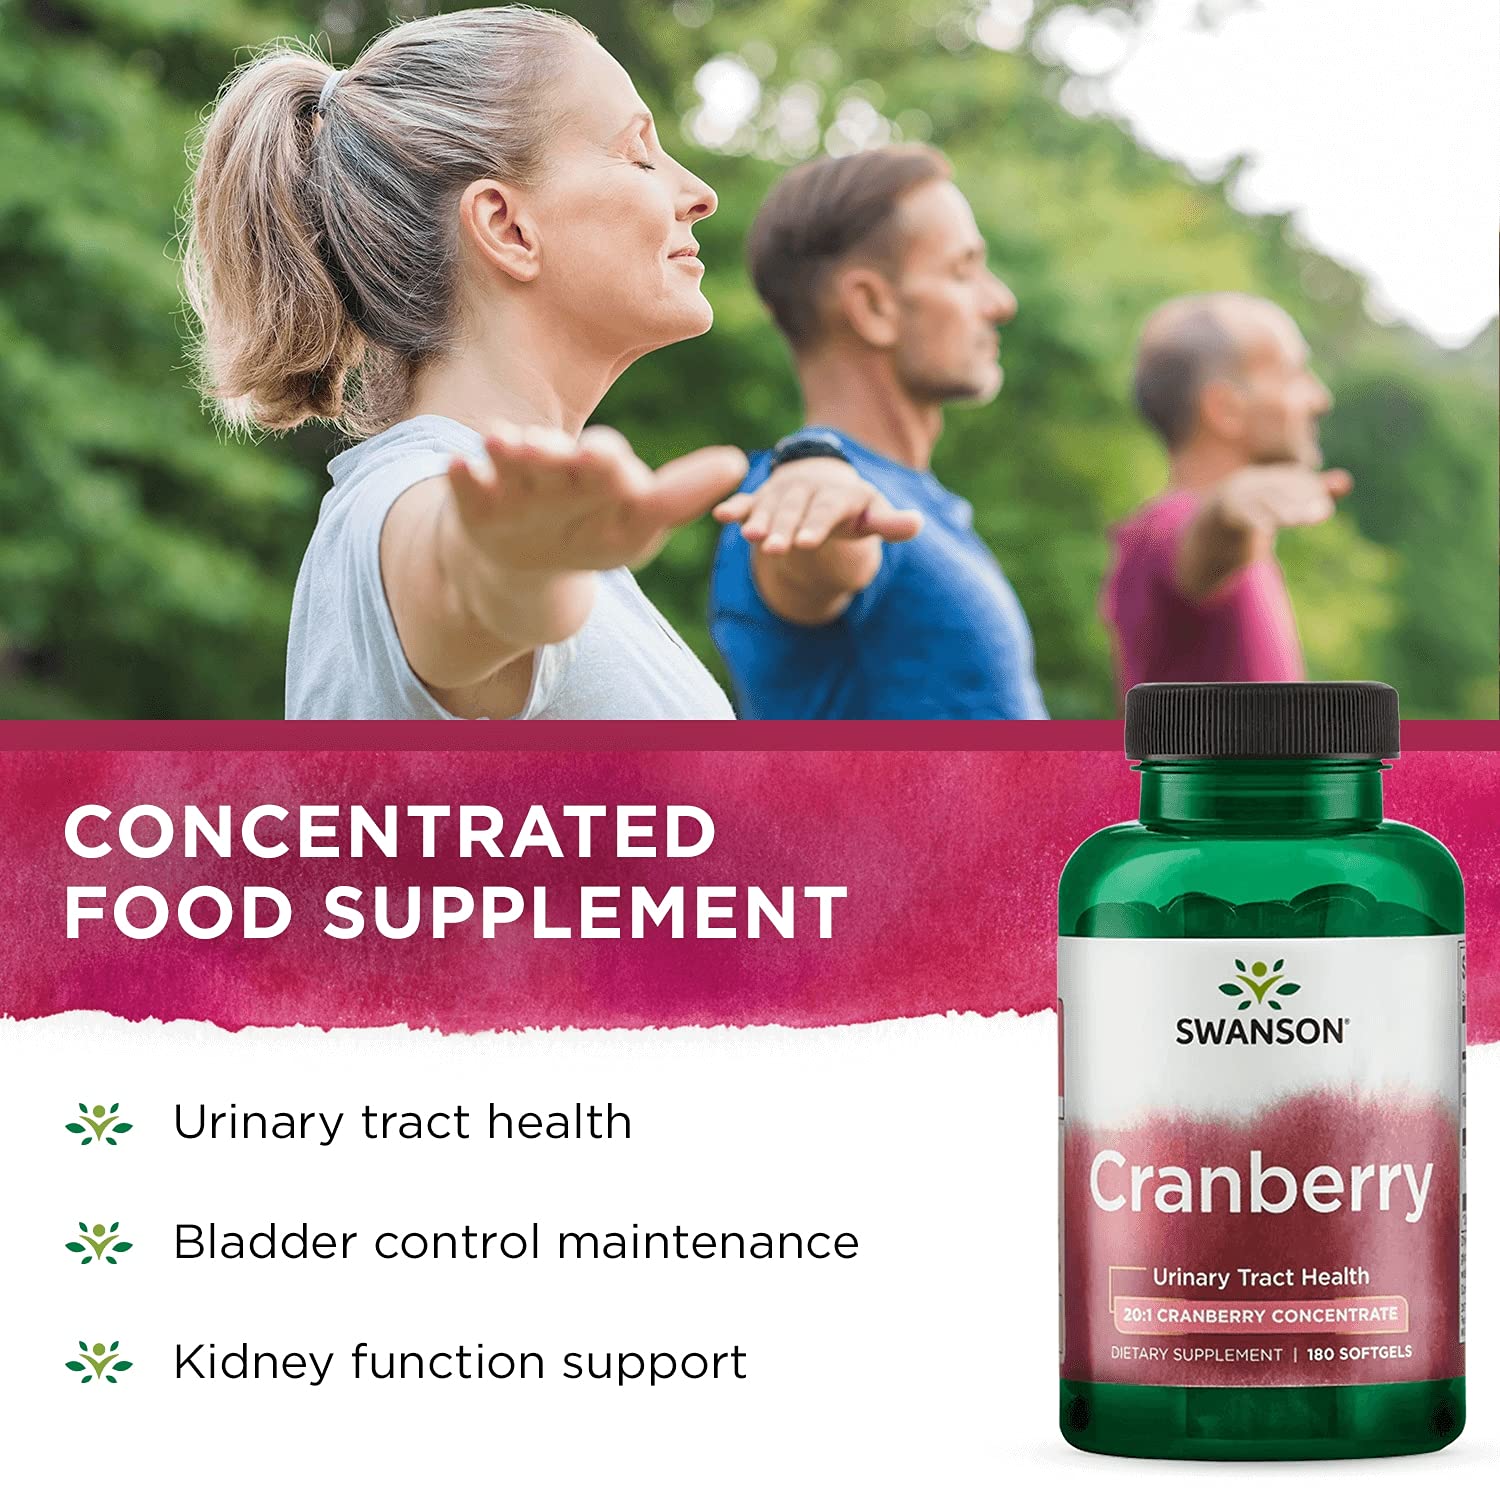 Cranberry Vitality Swanson's 20:1 Concentrated Supplement for Urinary Tract Health and Kidney Function (180 Softgels)